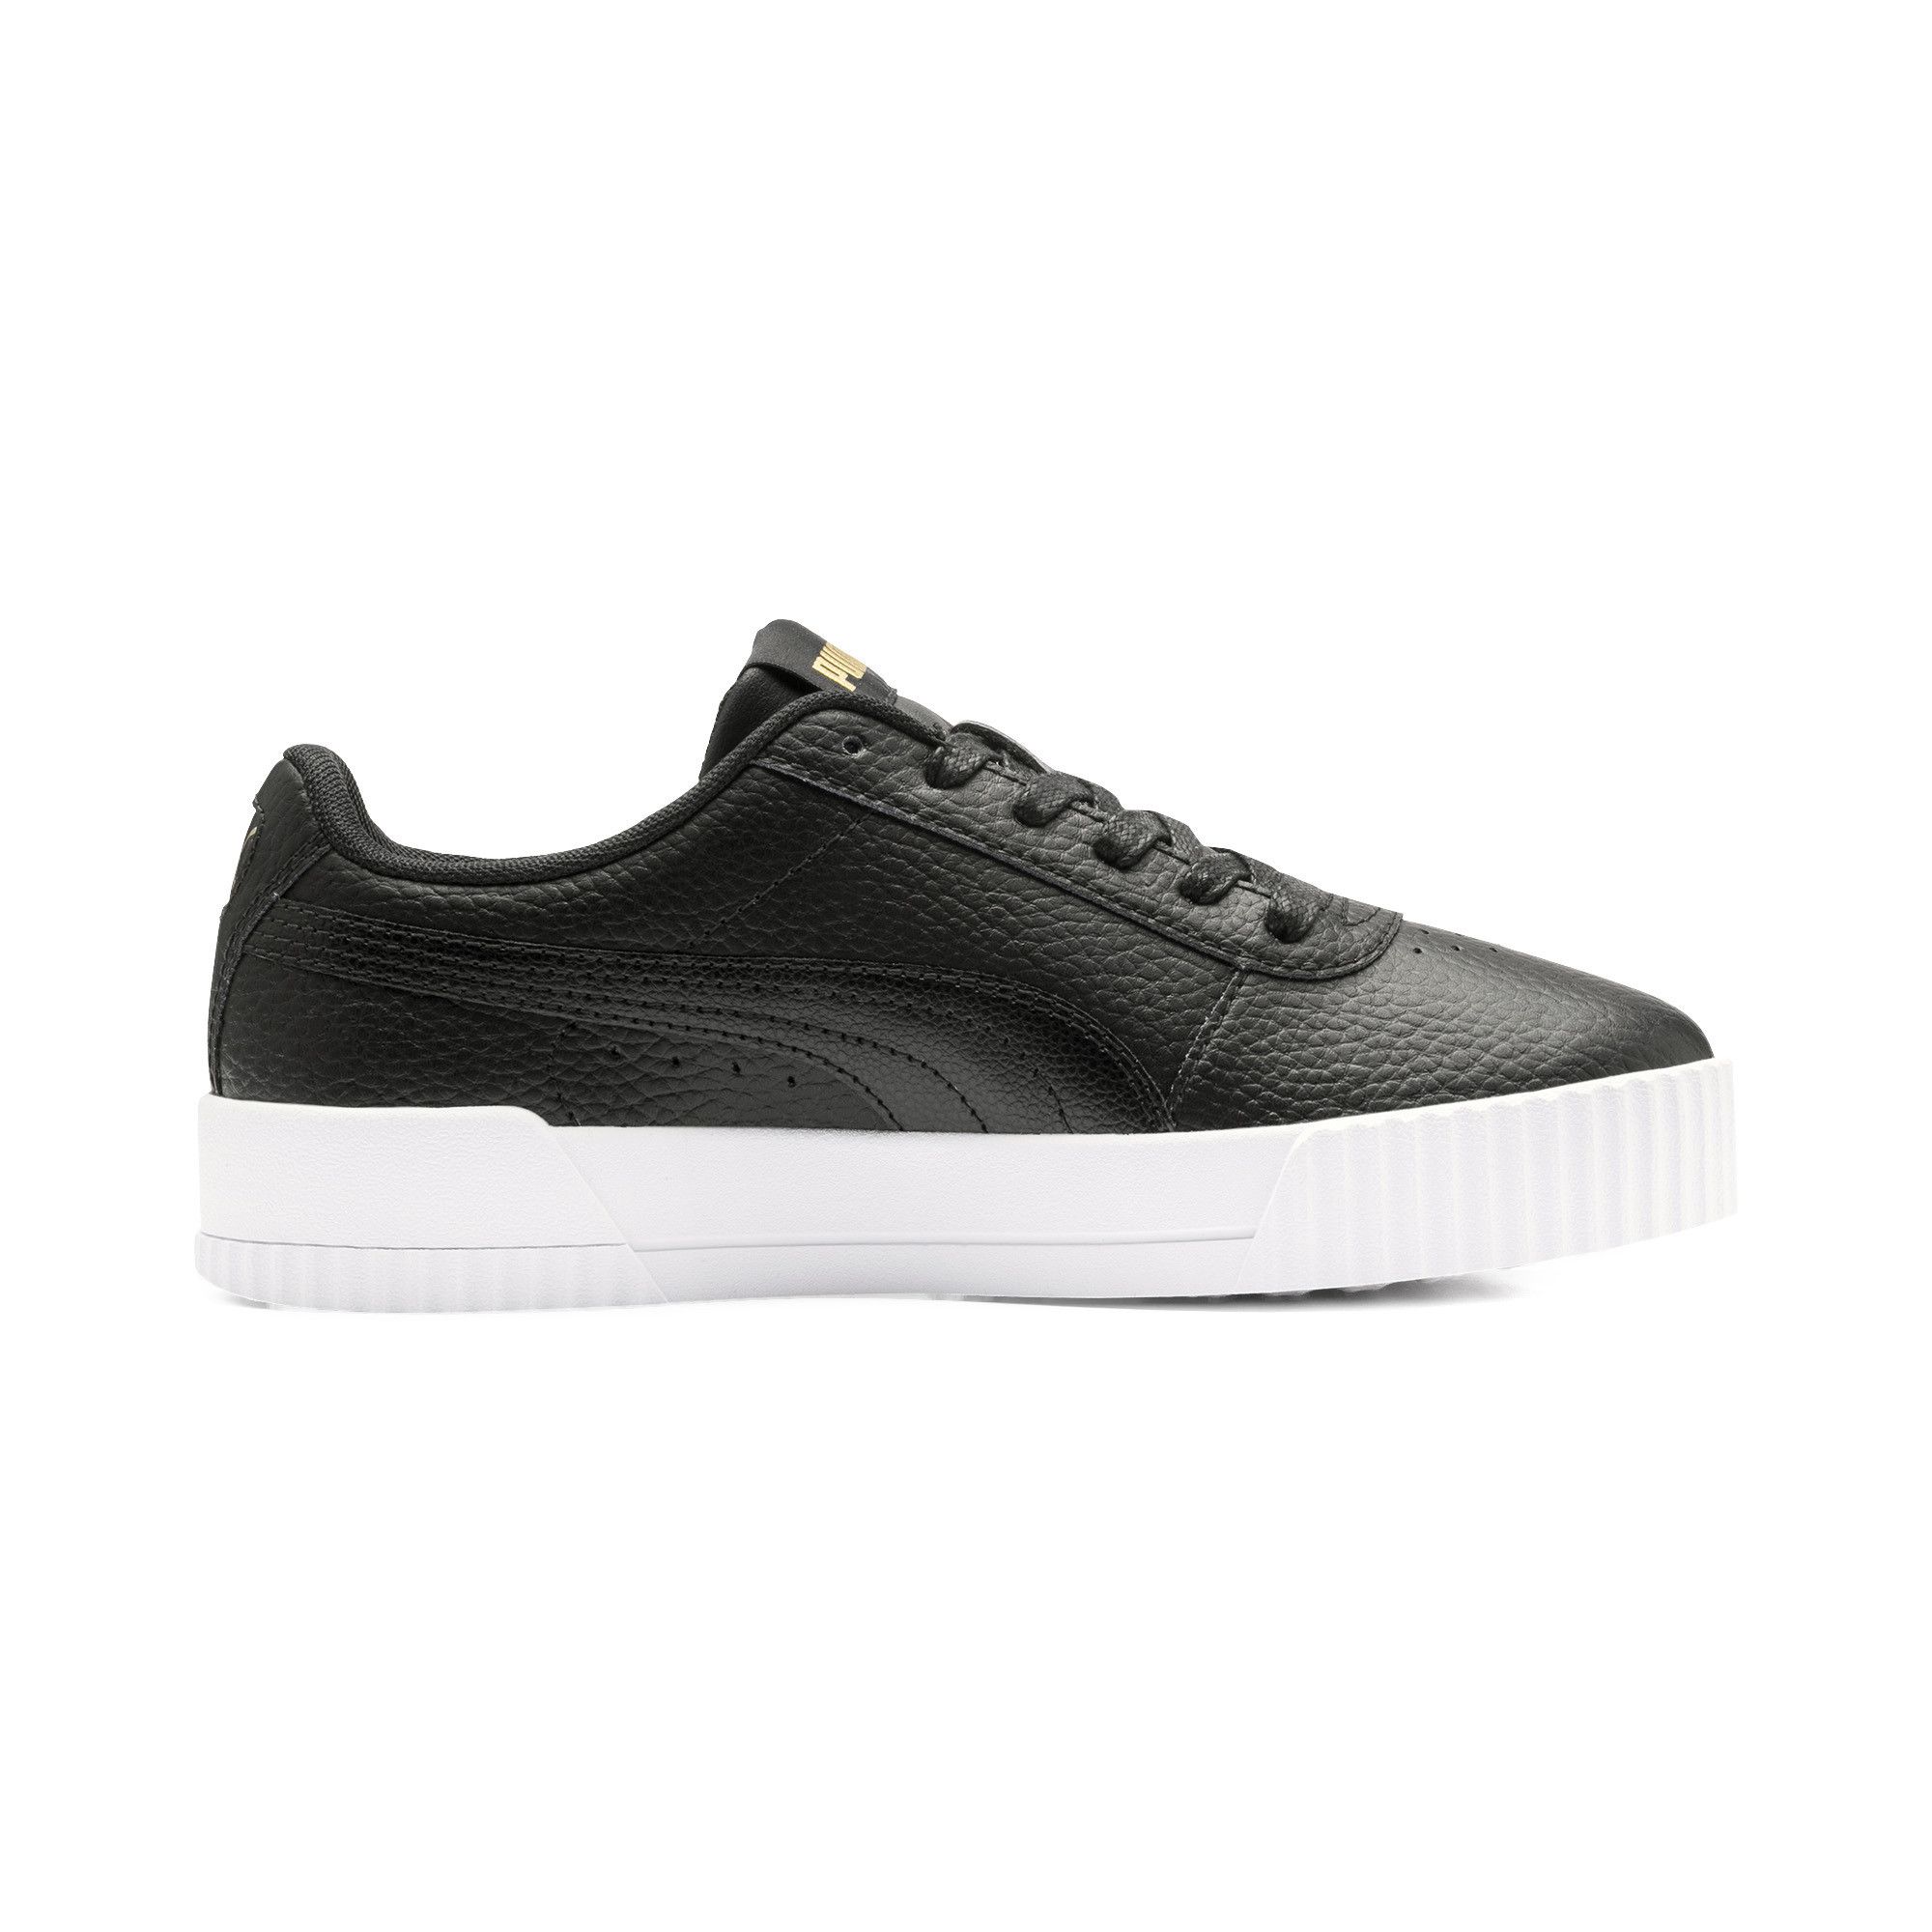  '80s-inspired tennis shoes interpreted to fit today's laid-back sneaker look of Californian beach towns. The premium leather upper gives these sneakers an air of class. FEATURES + BENEFITS   SoftFoam: PUMA’s dual-density insole provides two unique layers of cushioning for customised comfort, fit and long-lasting durability   DETAILS   Tennis-inspired silhouette   Bootie construction   Premium leather upper   Cushioned footbed for optimum comfort   Rubber outsole for grip   Lace closure for a snug fit   PUMA Formstrip at medial and lateral sides   PUMA Logo at lateral side and tongue   PUMA Cat Logo at heel